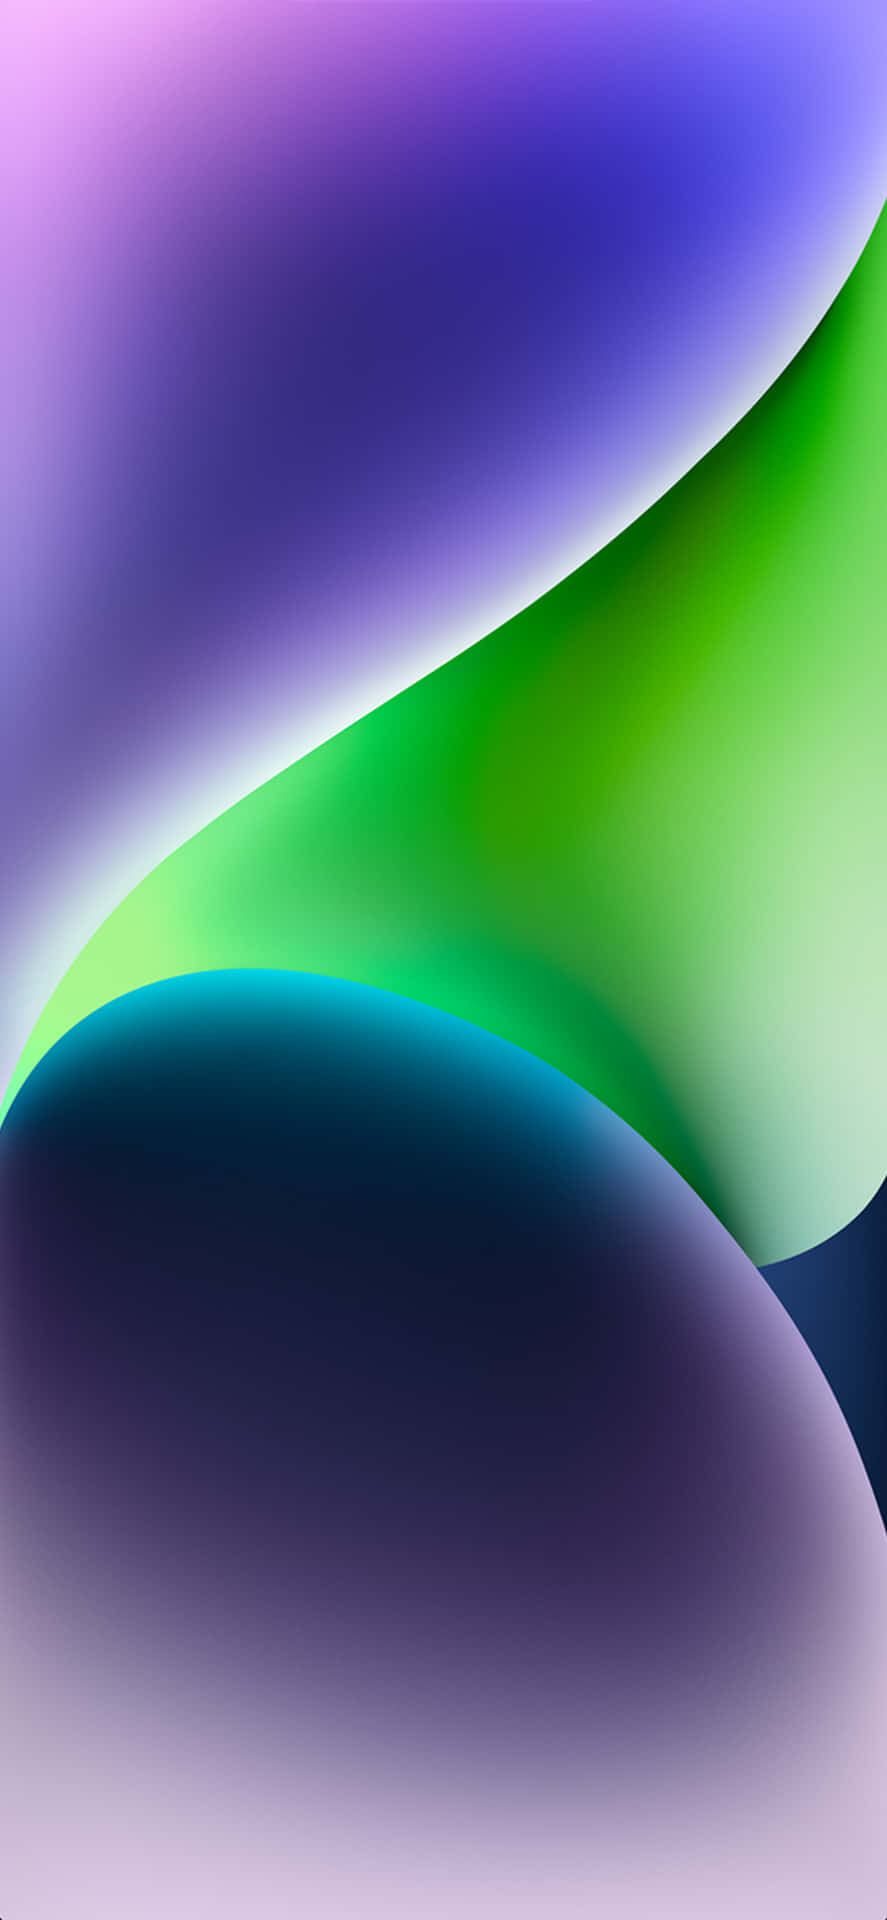 Iphone Xs Max Apple Background Purple Green Background